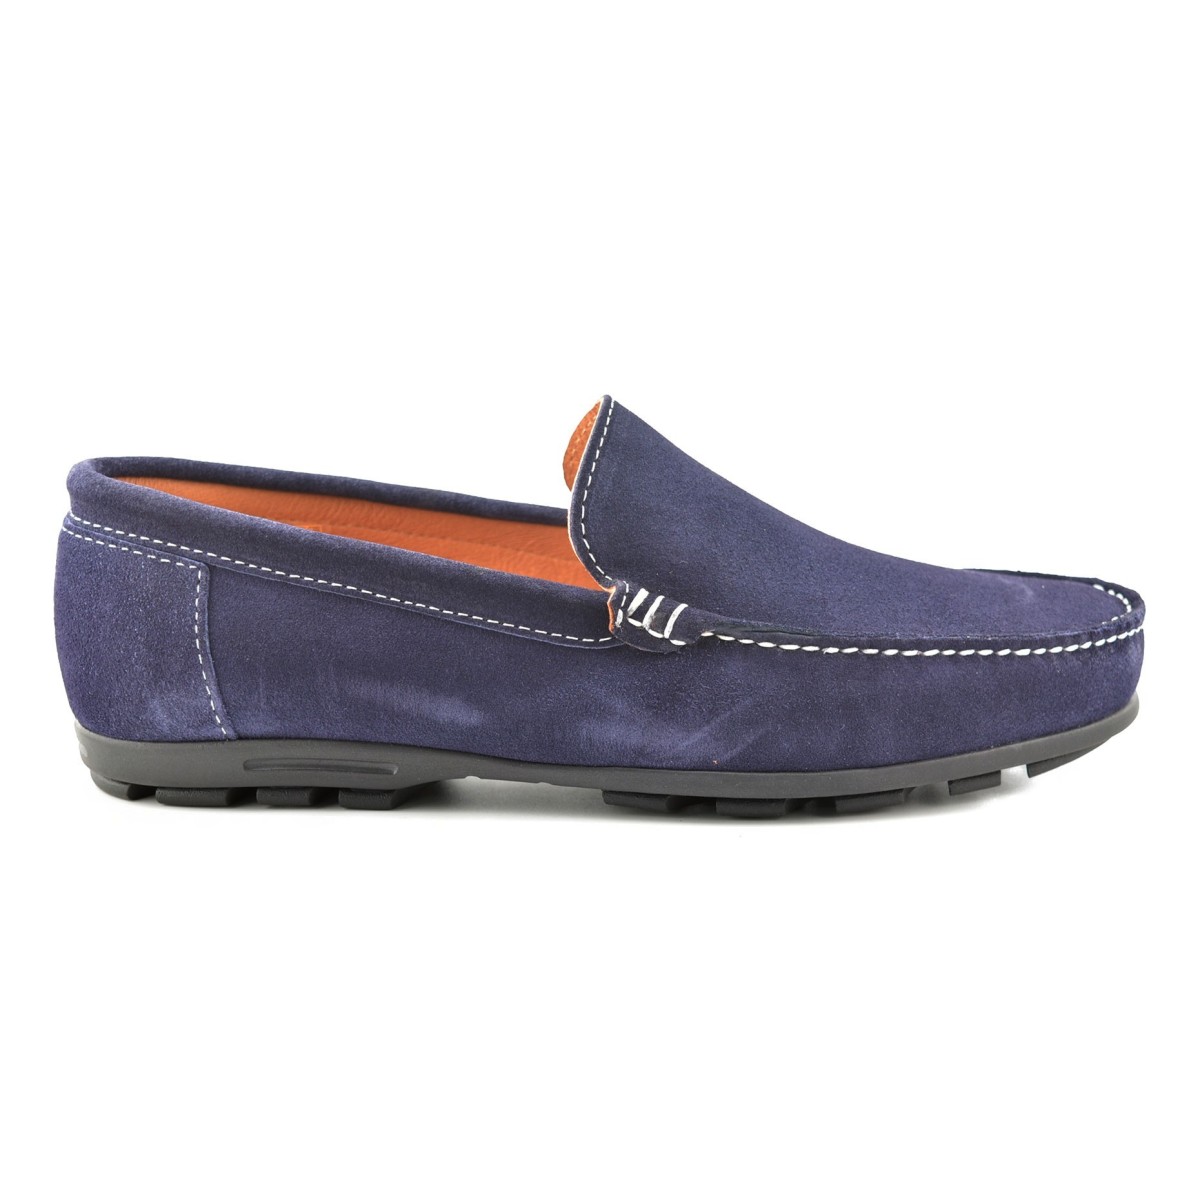 Blue leather loafers by Latino